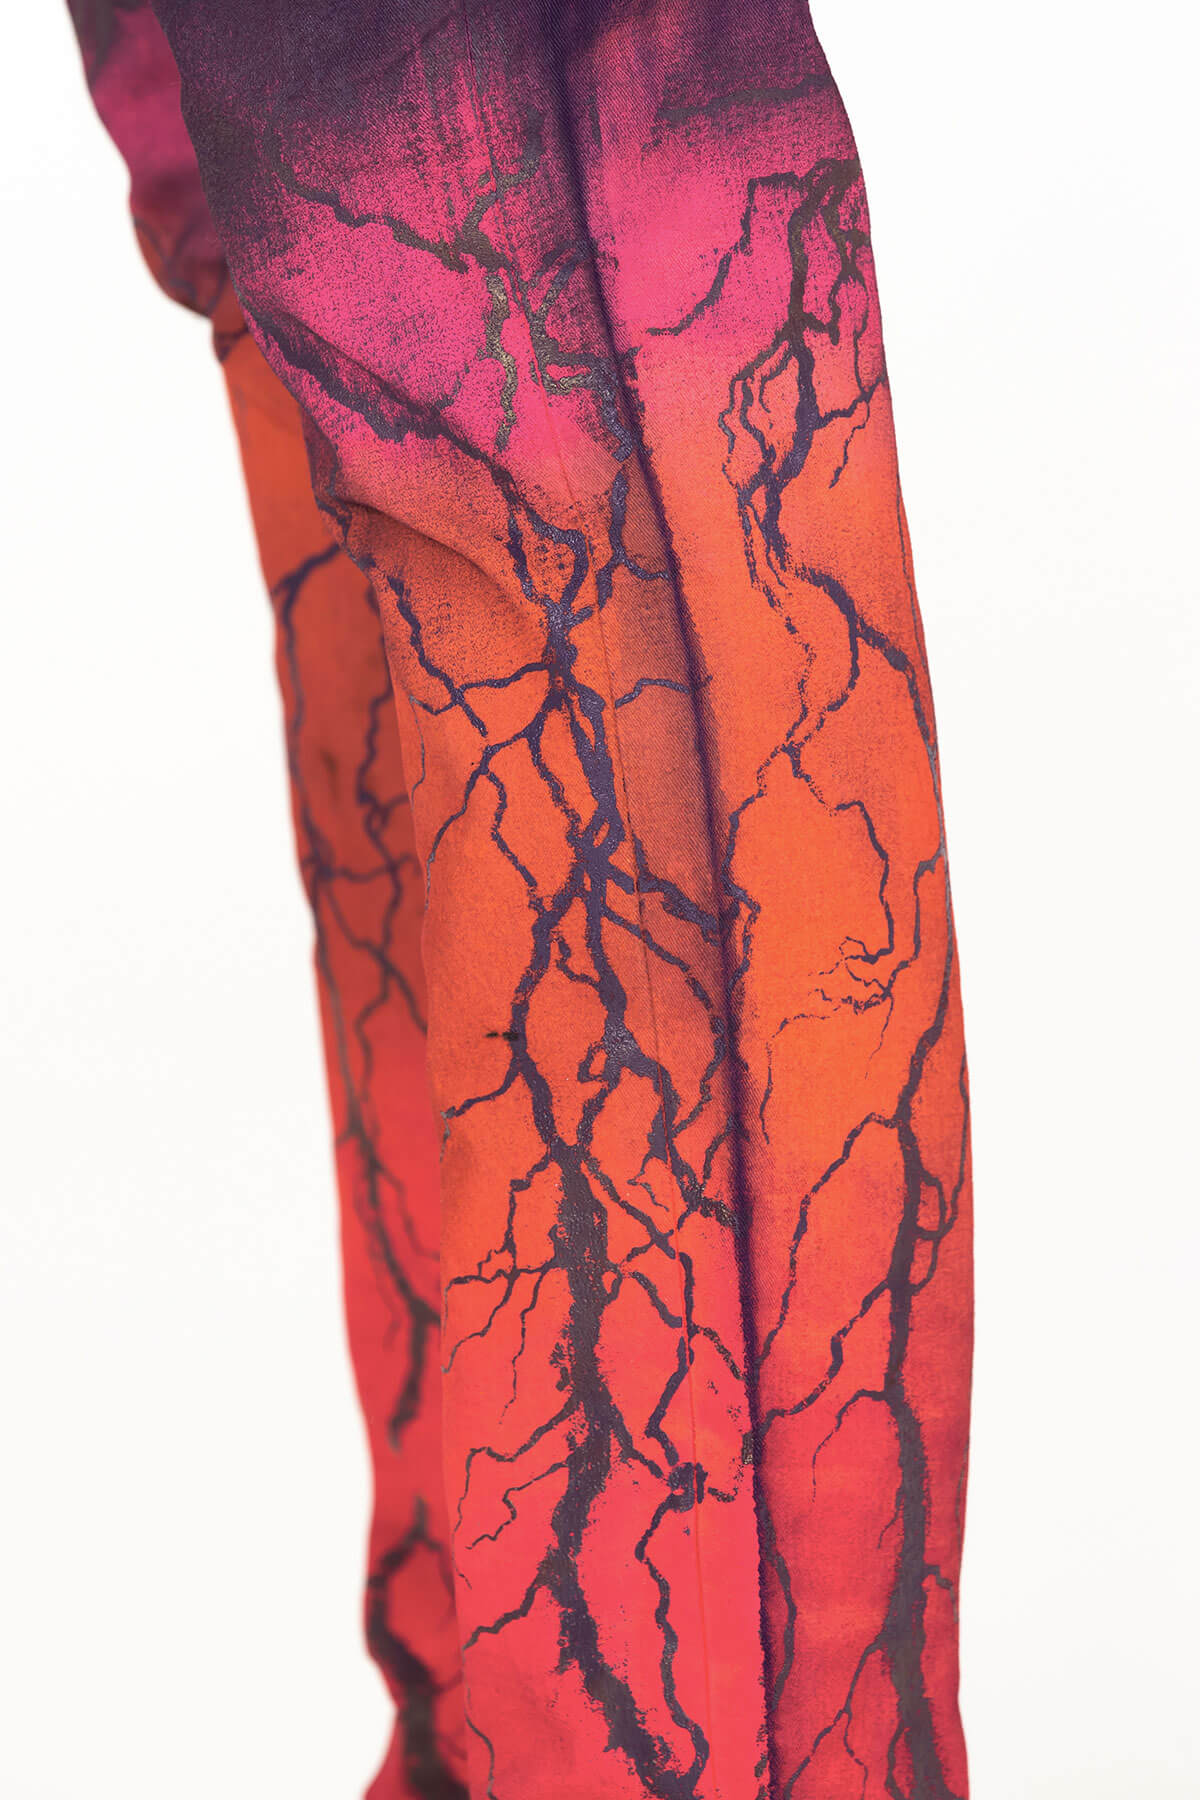 LIGHTNING OMBRE HAND SPRAYED AND CRAFTED CRIXUS JEAN - MJB